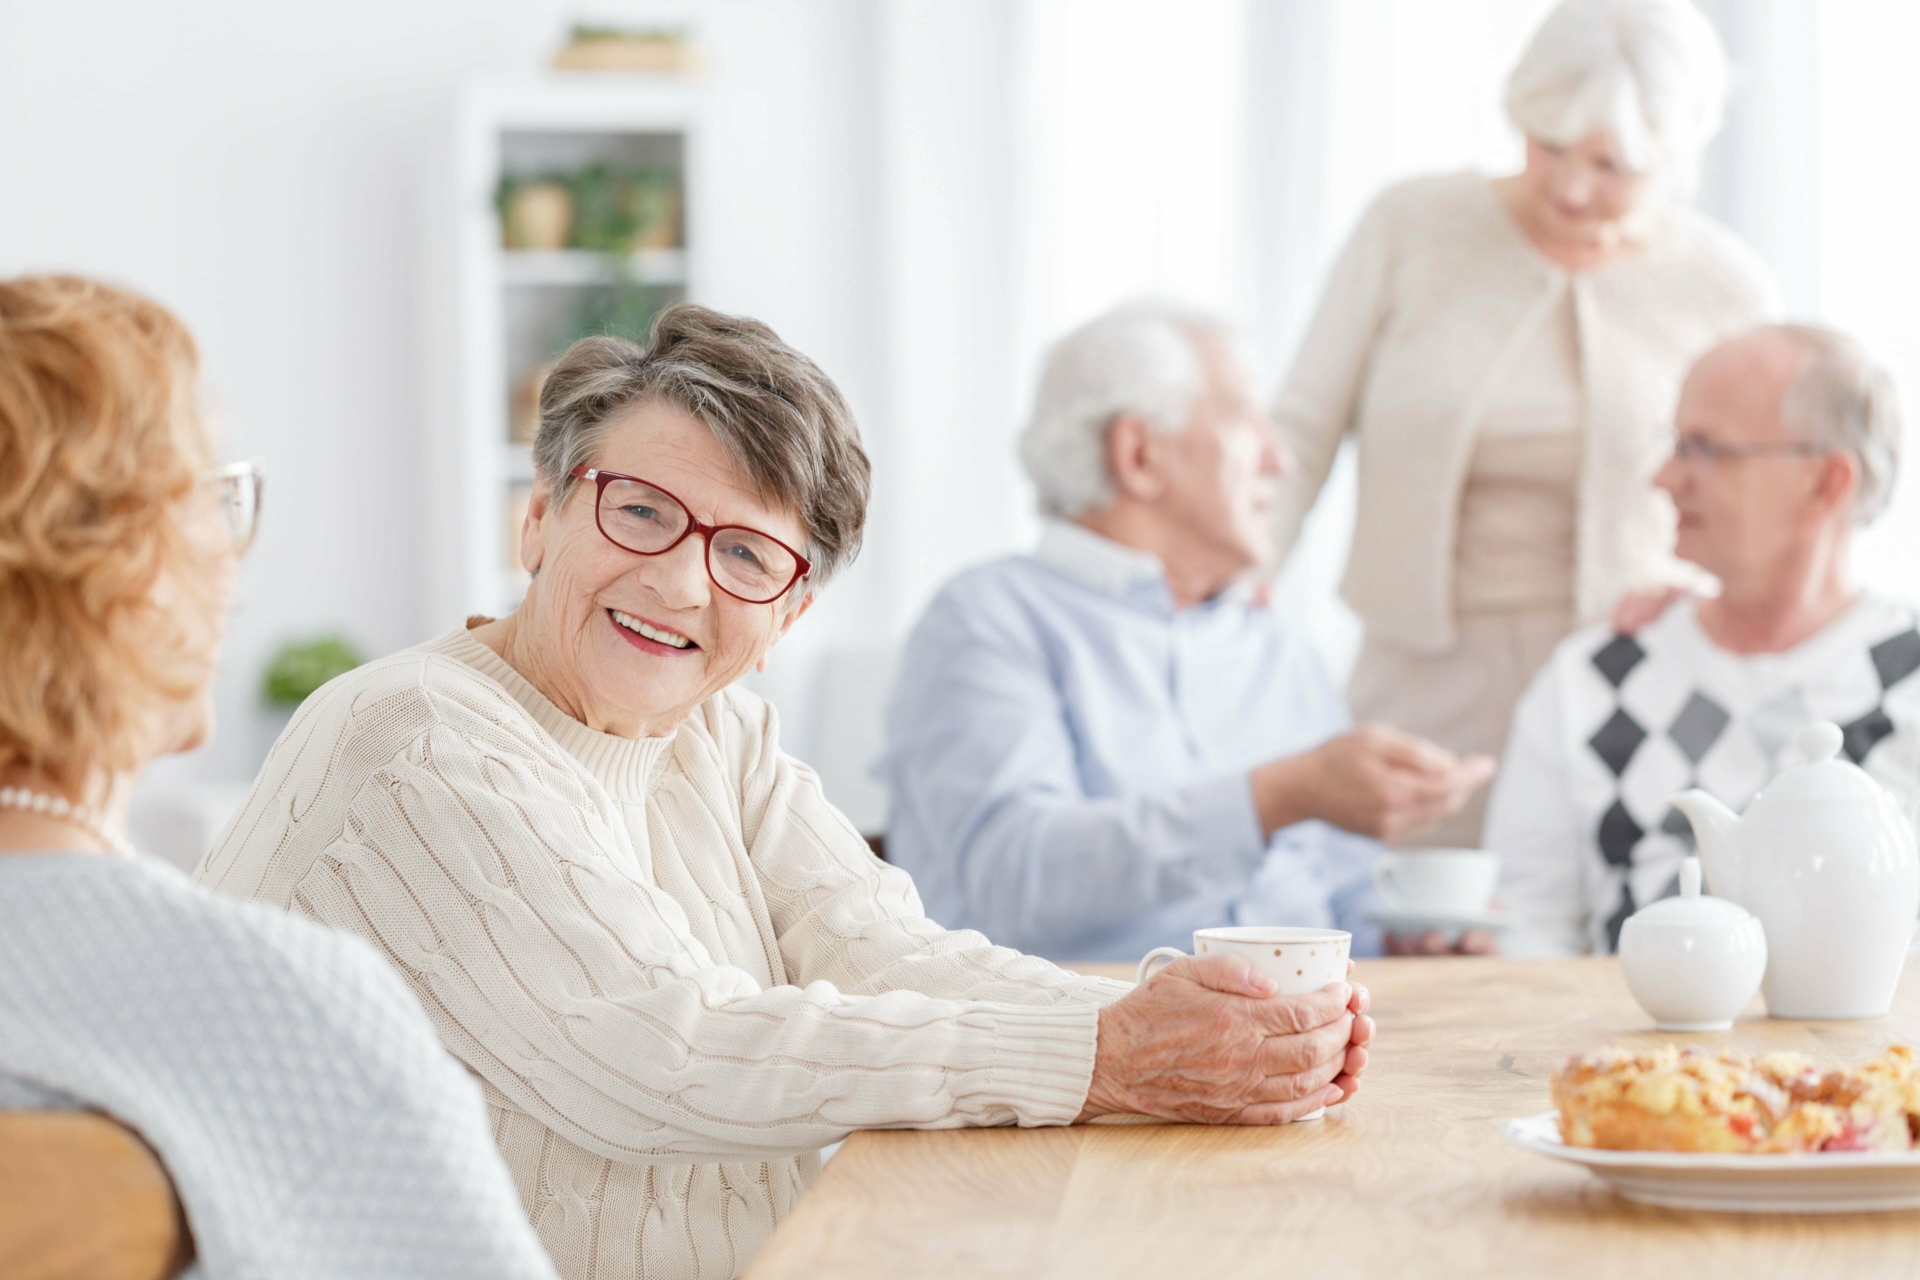 New method for aged care providers to monitor and compare care